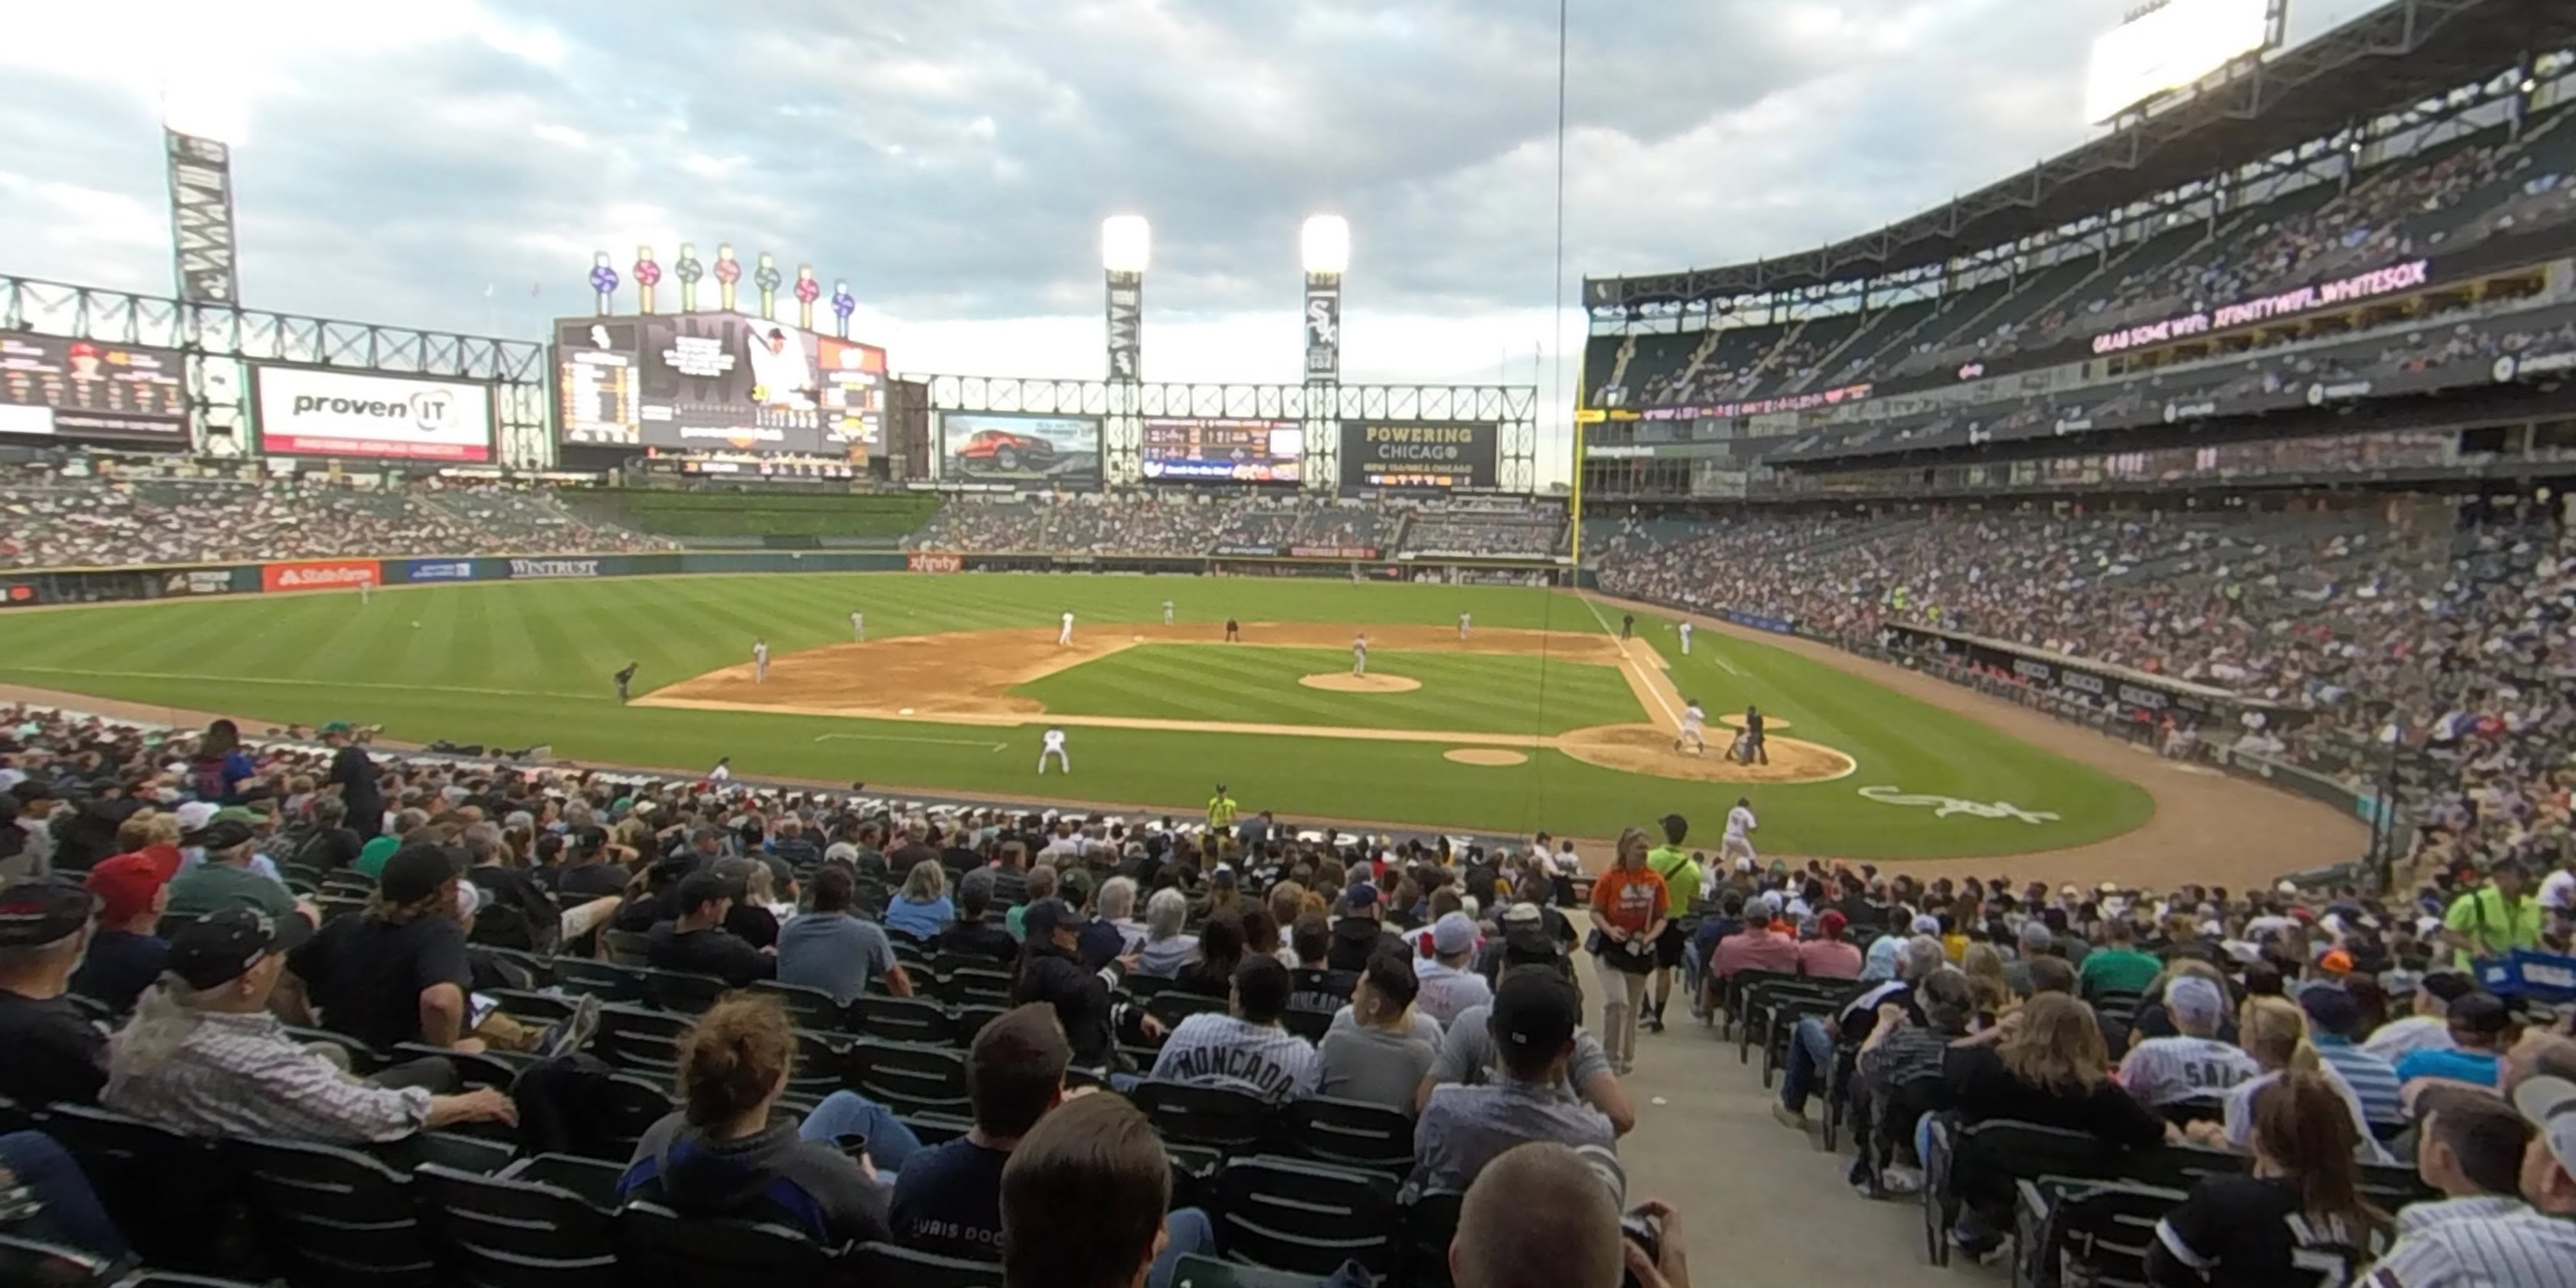 section 136 panoramic seat view  - guaranteed rate field